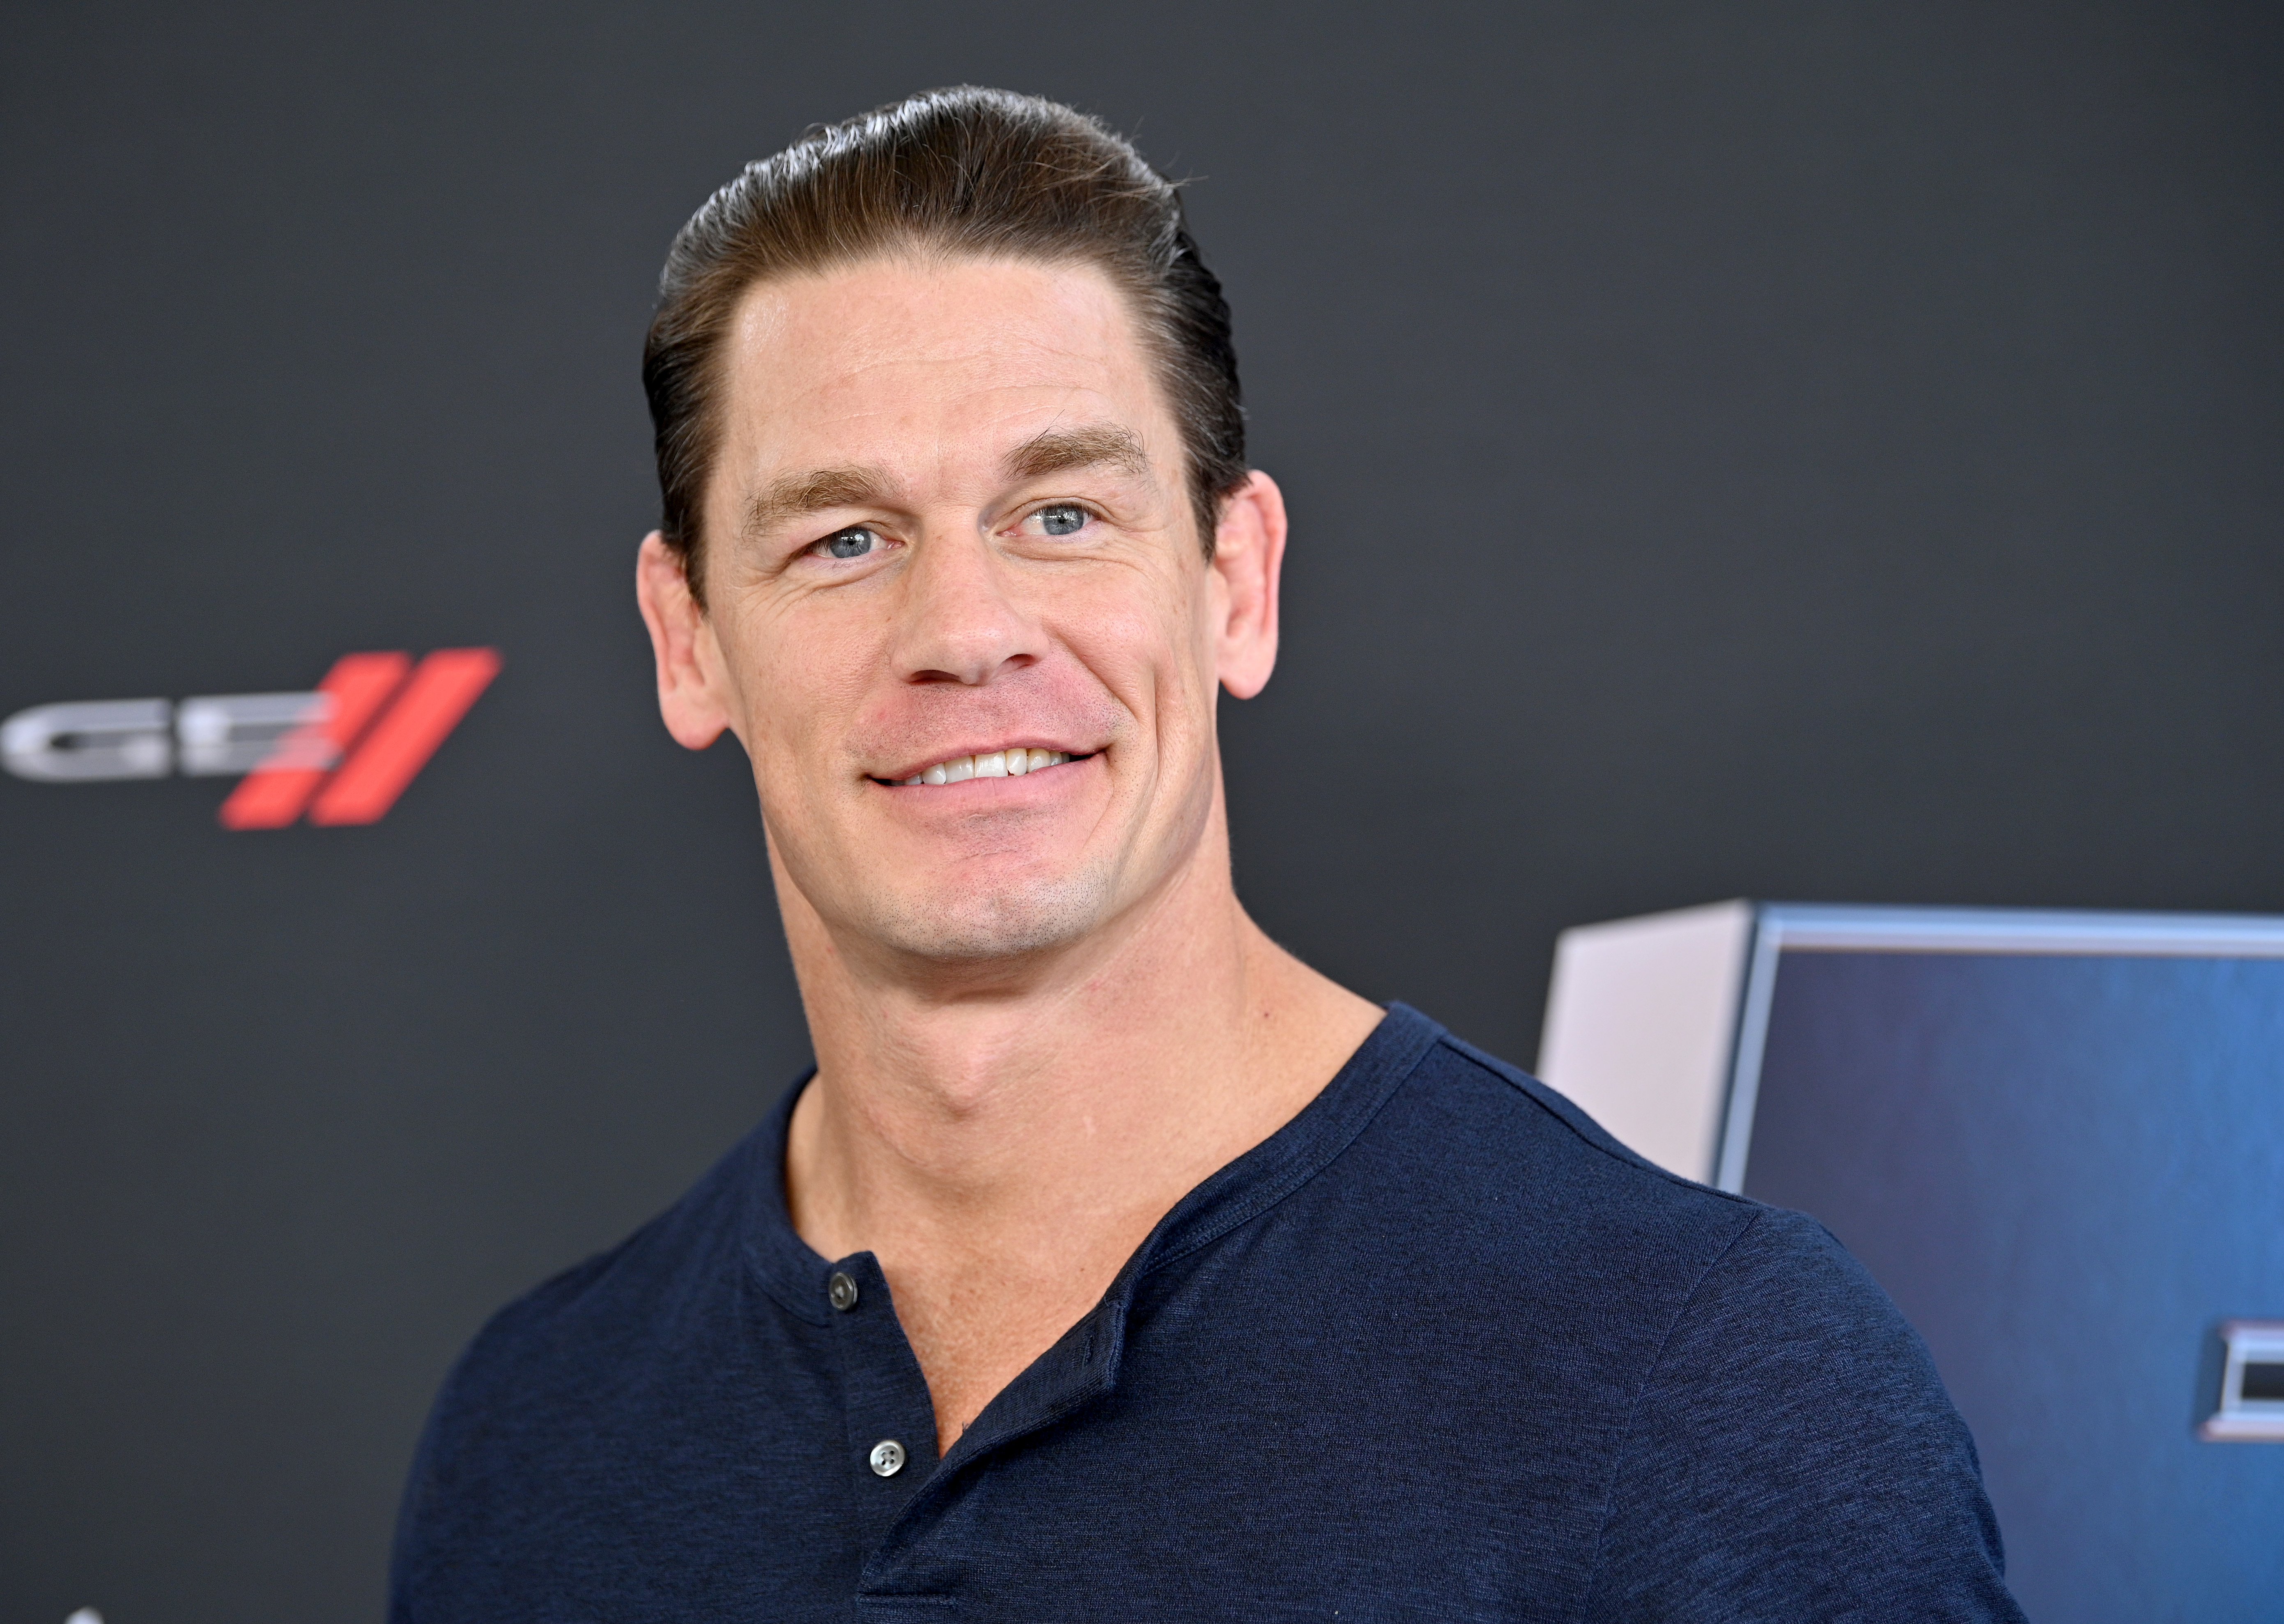 John Cena attends "The Road to F9" Global Fan Extravaganza at Maurice A. Ferre Park on January 31, 2020, in Miami, Florida. | Source: Getty Images